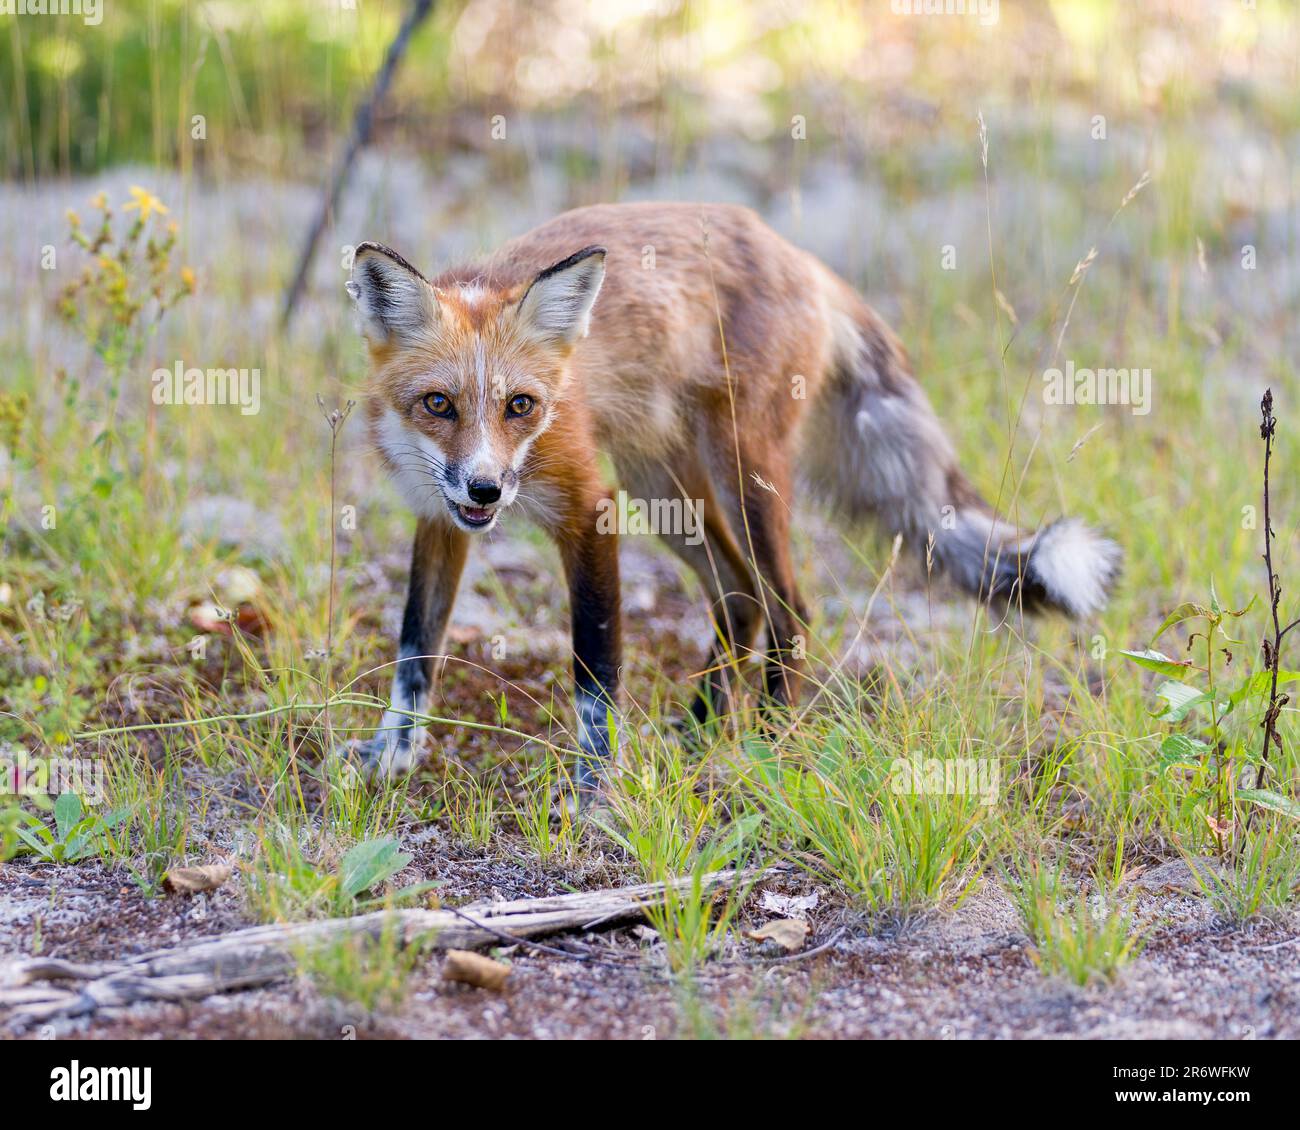 Red fox looking at camera with a blur foliage background in the summer season in its environment and habitat surrounding. Picture. Portrait. Fox Image Stock Photo